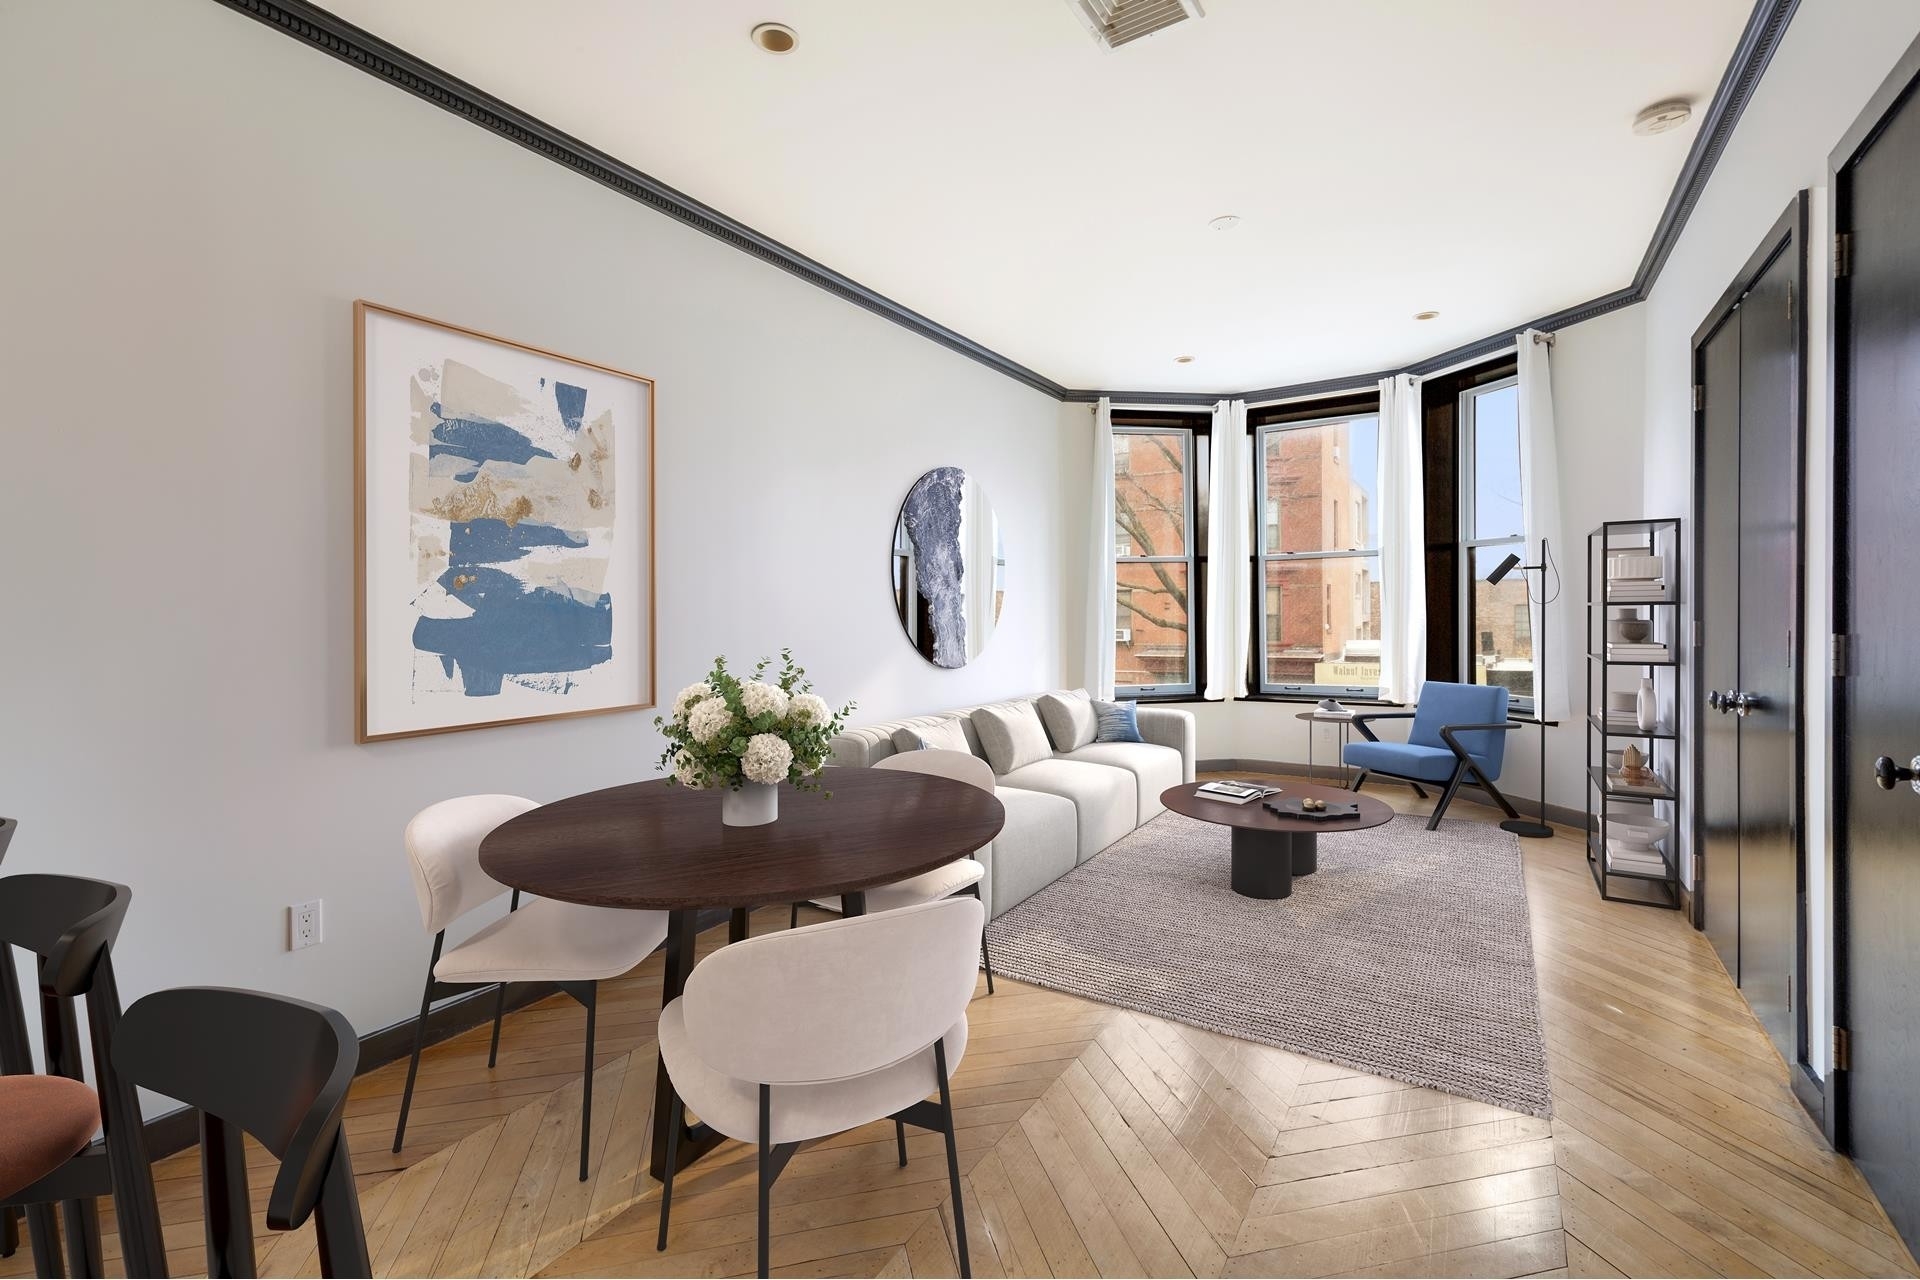 Condominium for Sale at 1015 8TH AVE, 2 Park Slope, Brooklyn, NY 11215